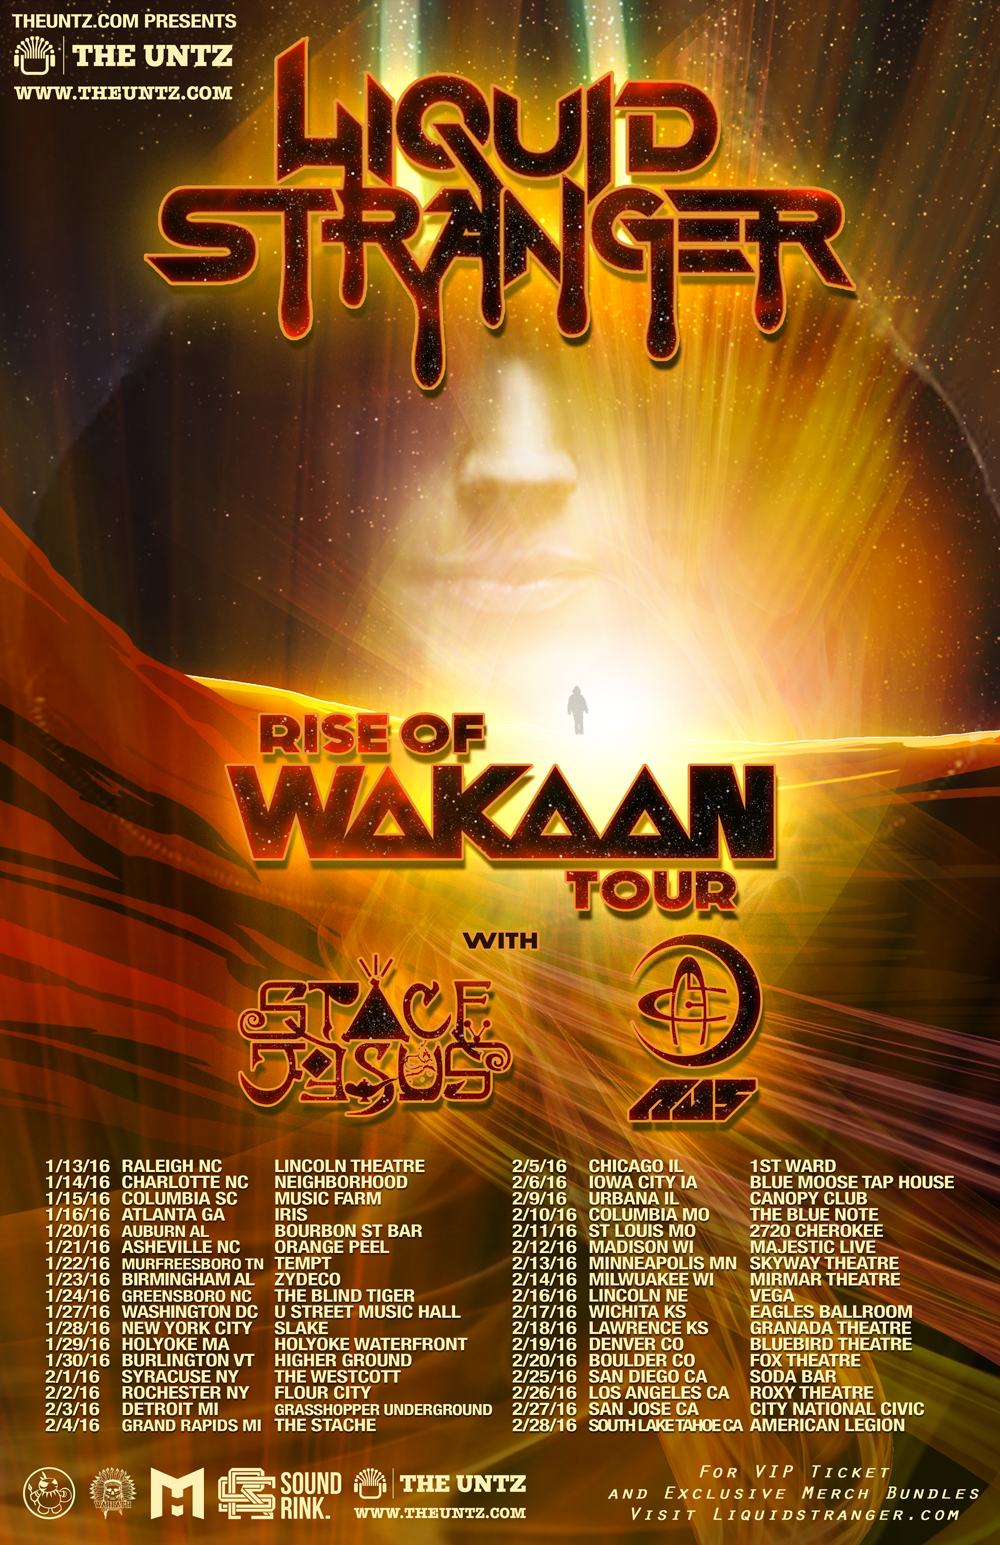 Rise of Wakaan